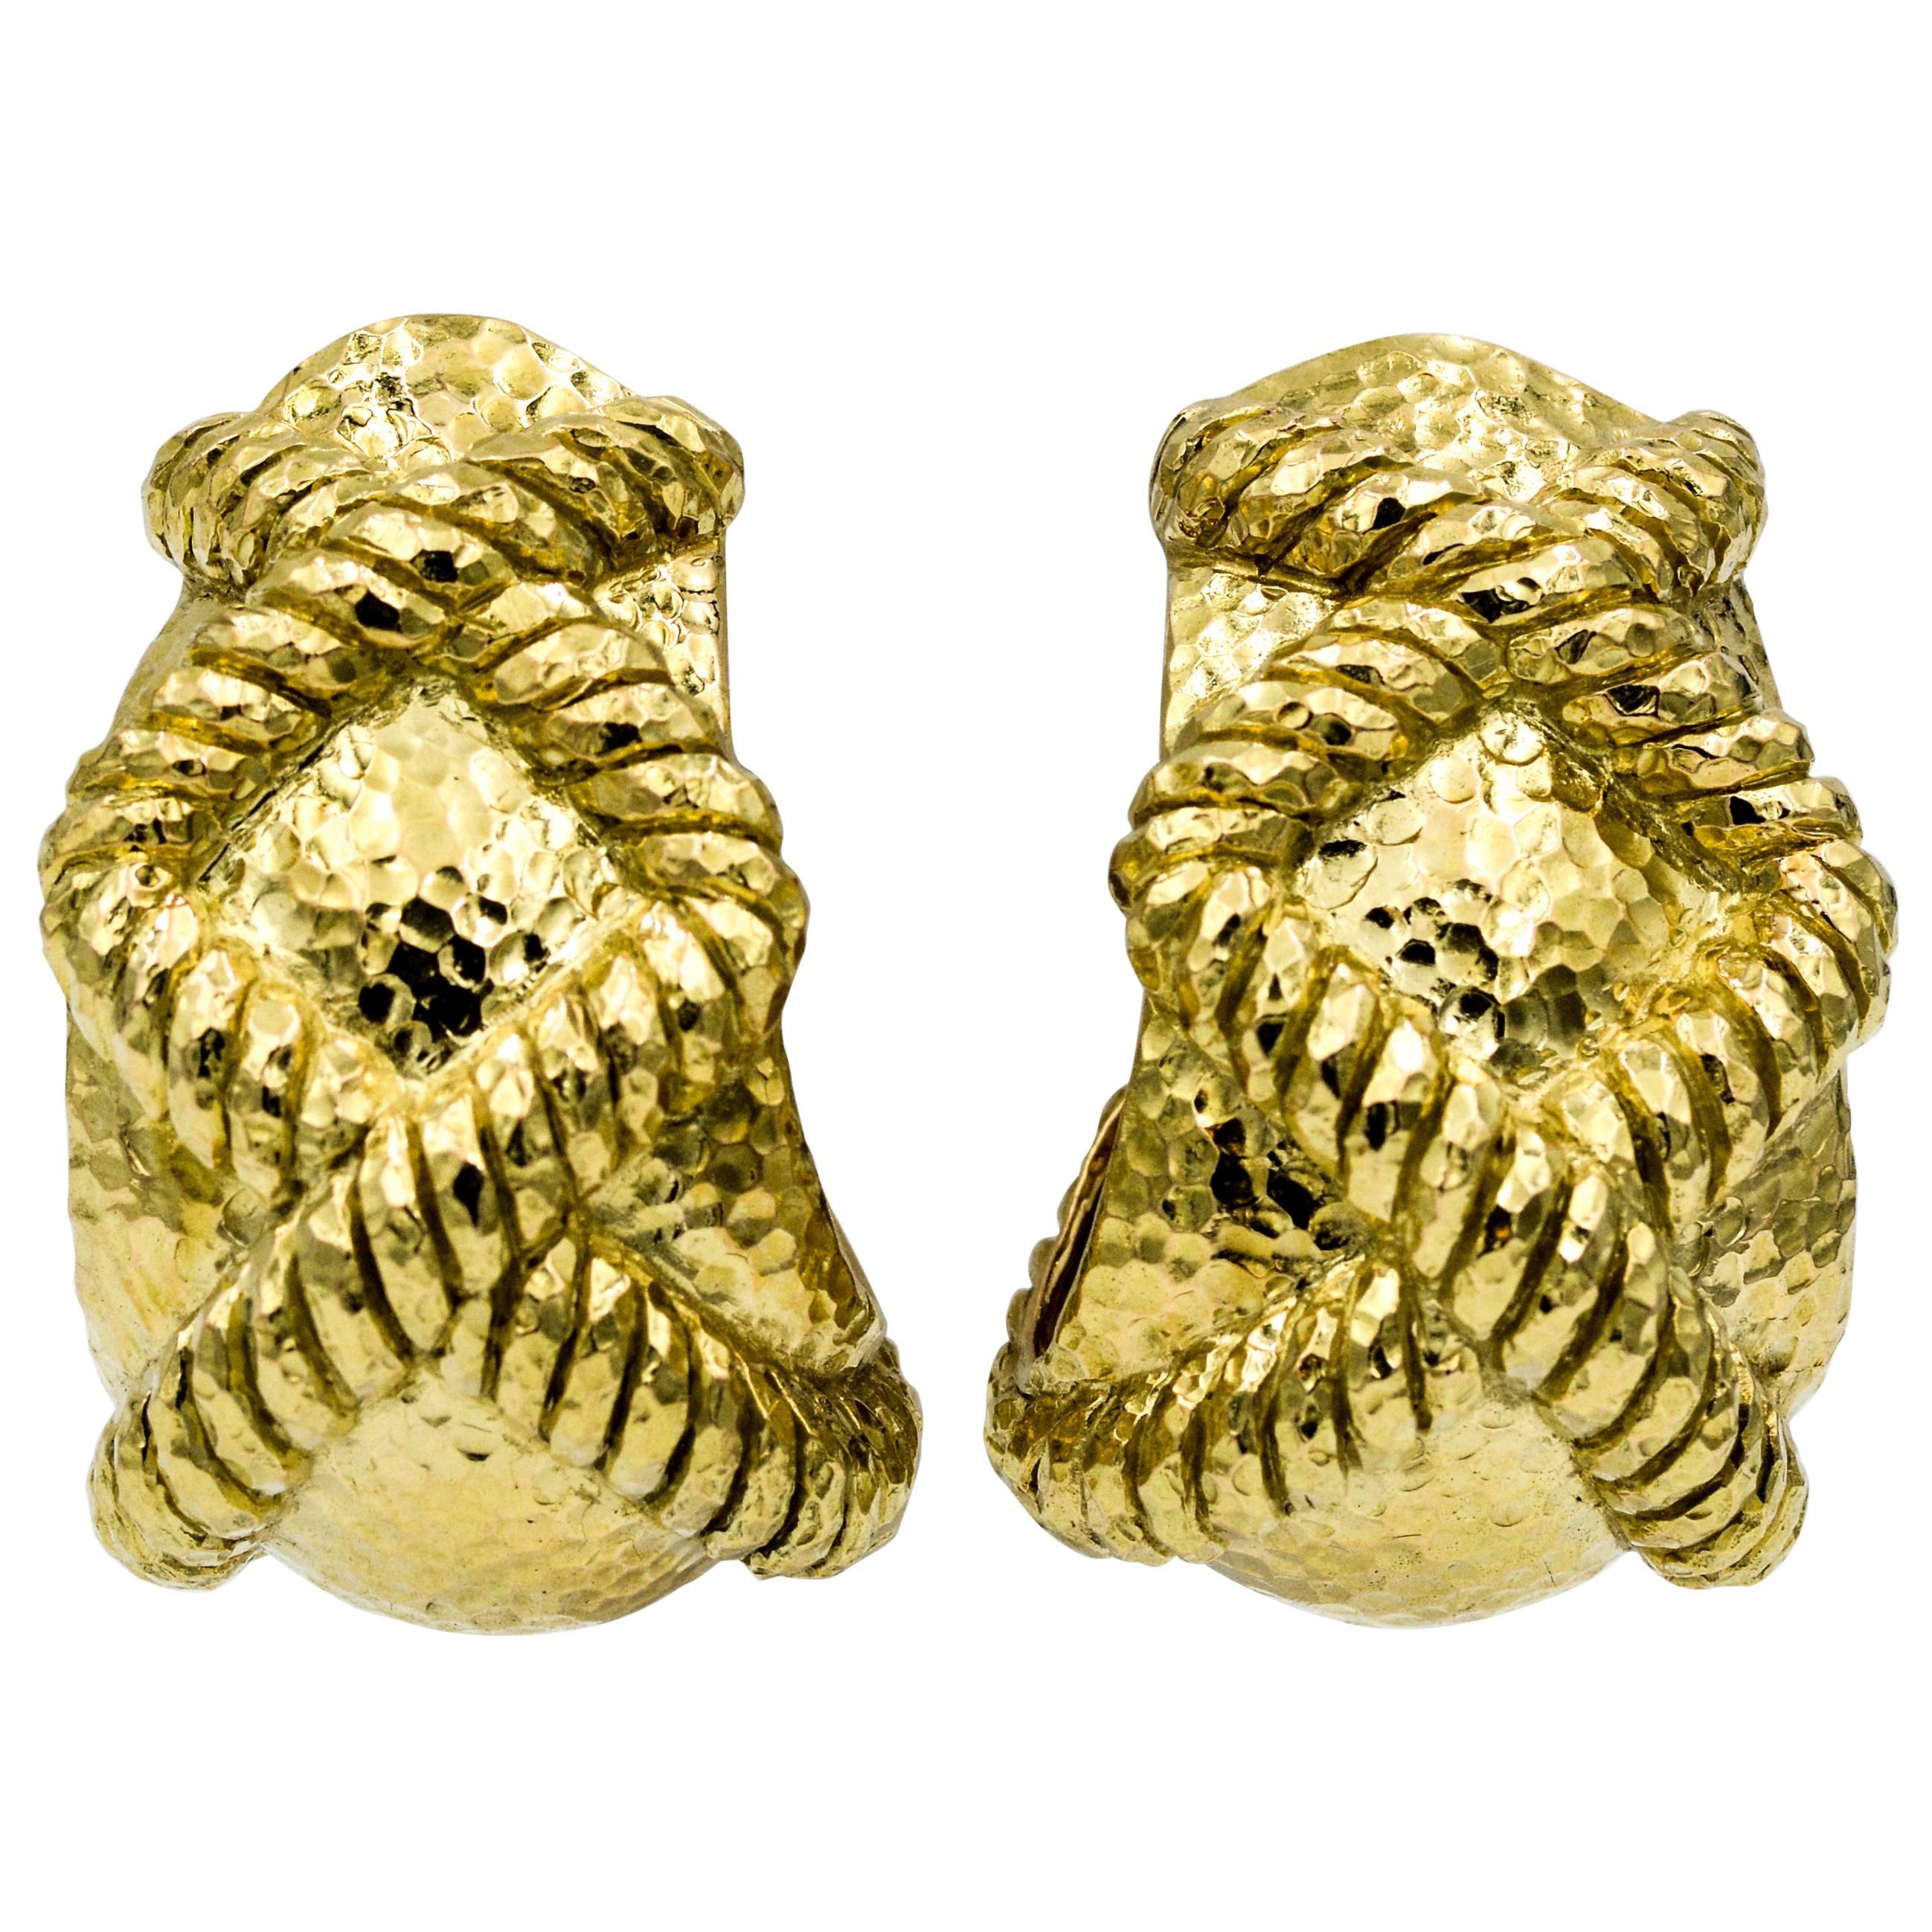 Driven by art, design and bold pieces these earrings embody David Webb’s textured gold statements. These clipped back 18K yellow gold earrings have two banded X's set in a hammered finish. The earrings measure 35.25 mm tall and 22.55 mm wide, and